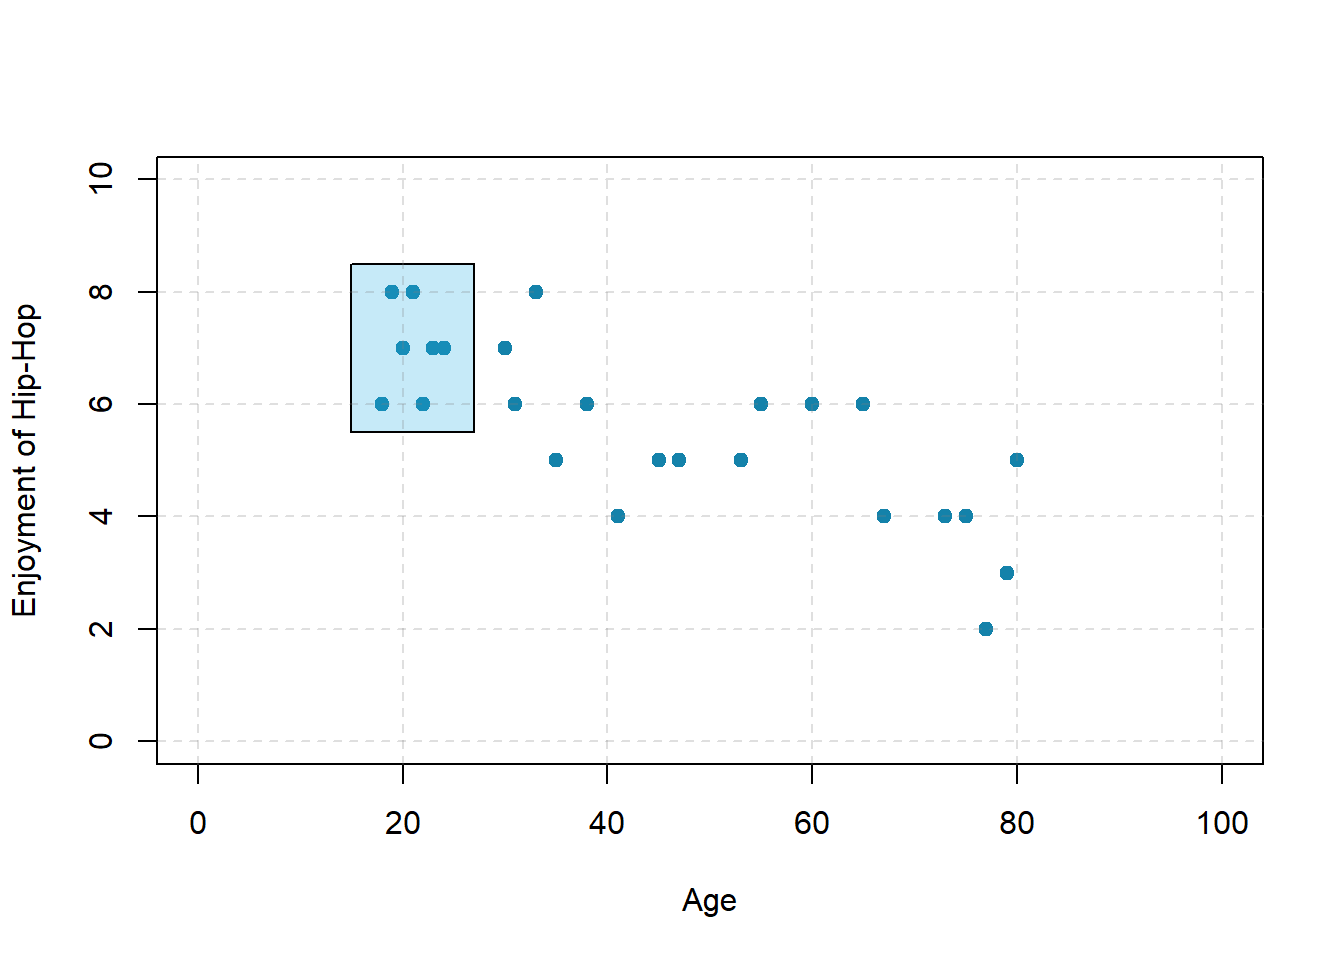 Hypothetical data showing how a strong overall correlation can appear to be weak when one variable has a restricted range. The overall correlation here is −.77, but the correlation for the 18- to 24-year-olds (in the blue box) is 0.